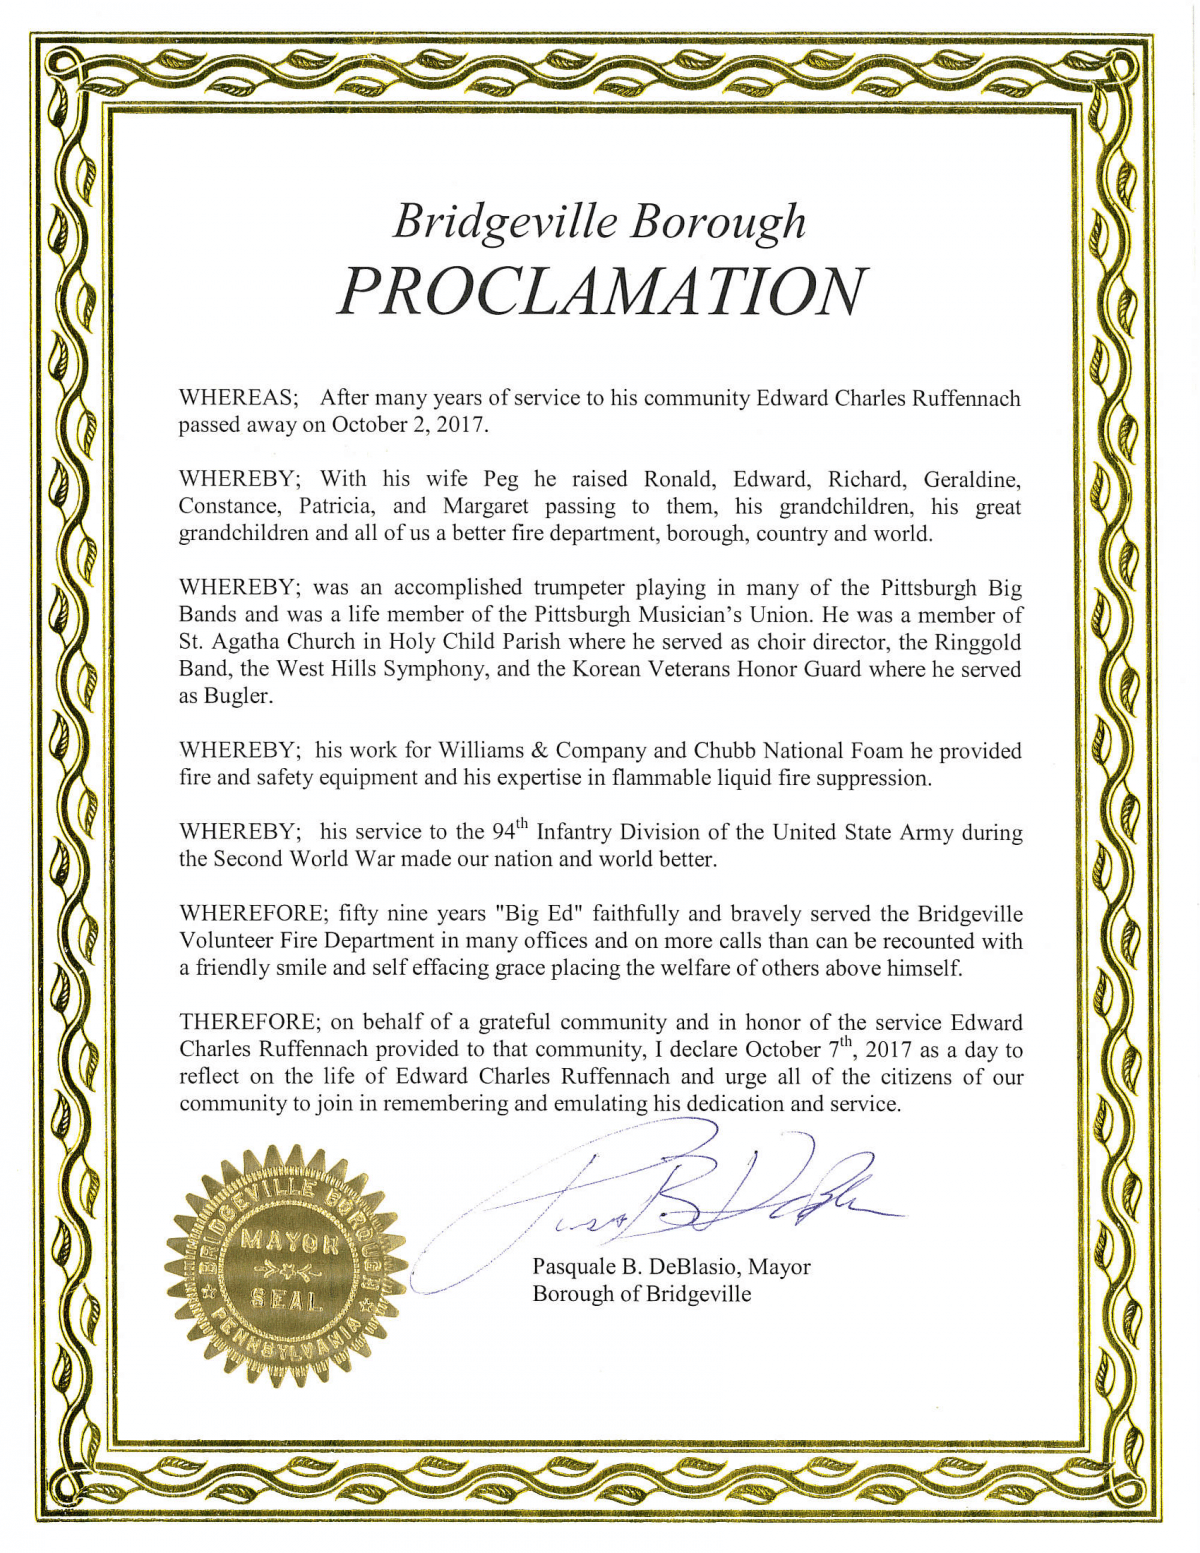 Full text of Bridgeville Mayor Pat DeBlasio's proclamation announcing Oct 7 as a day to honor the memory of Ed Ruffennach